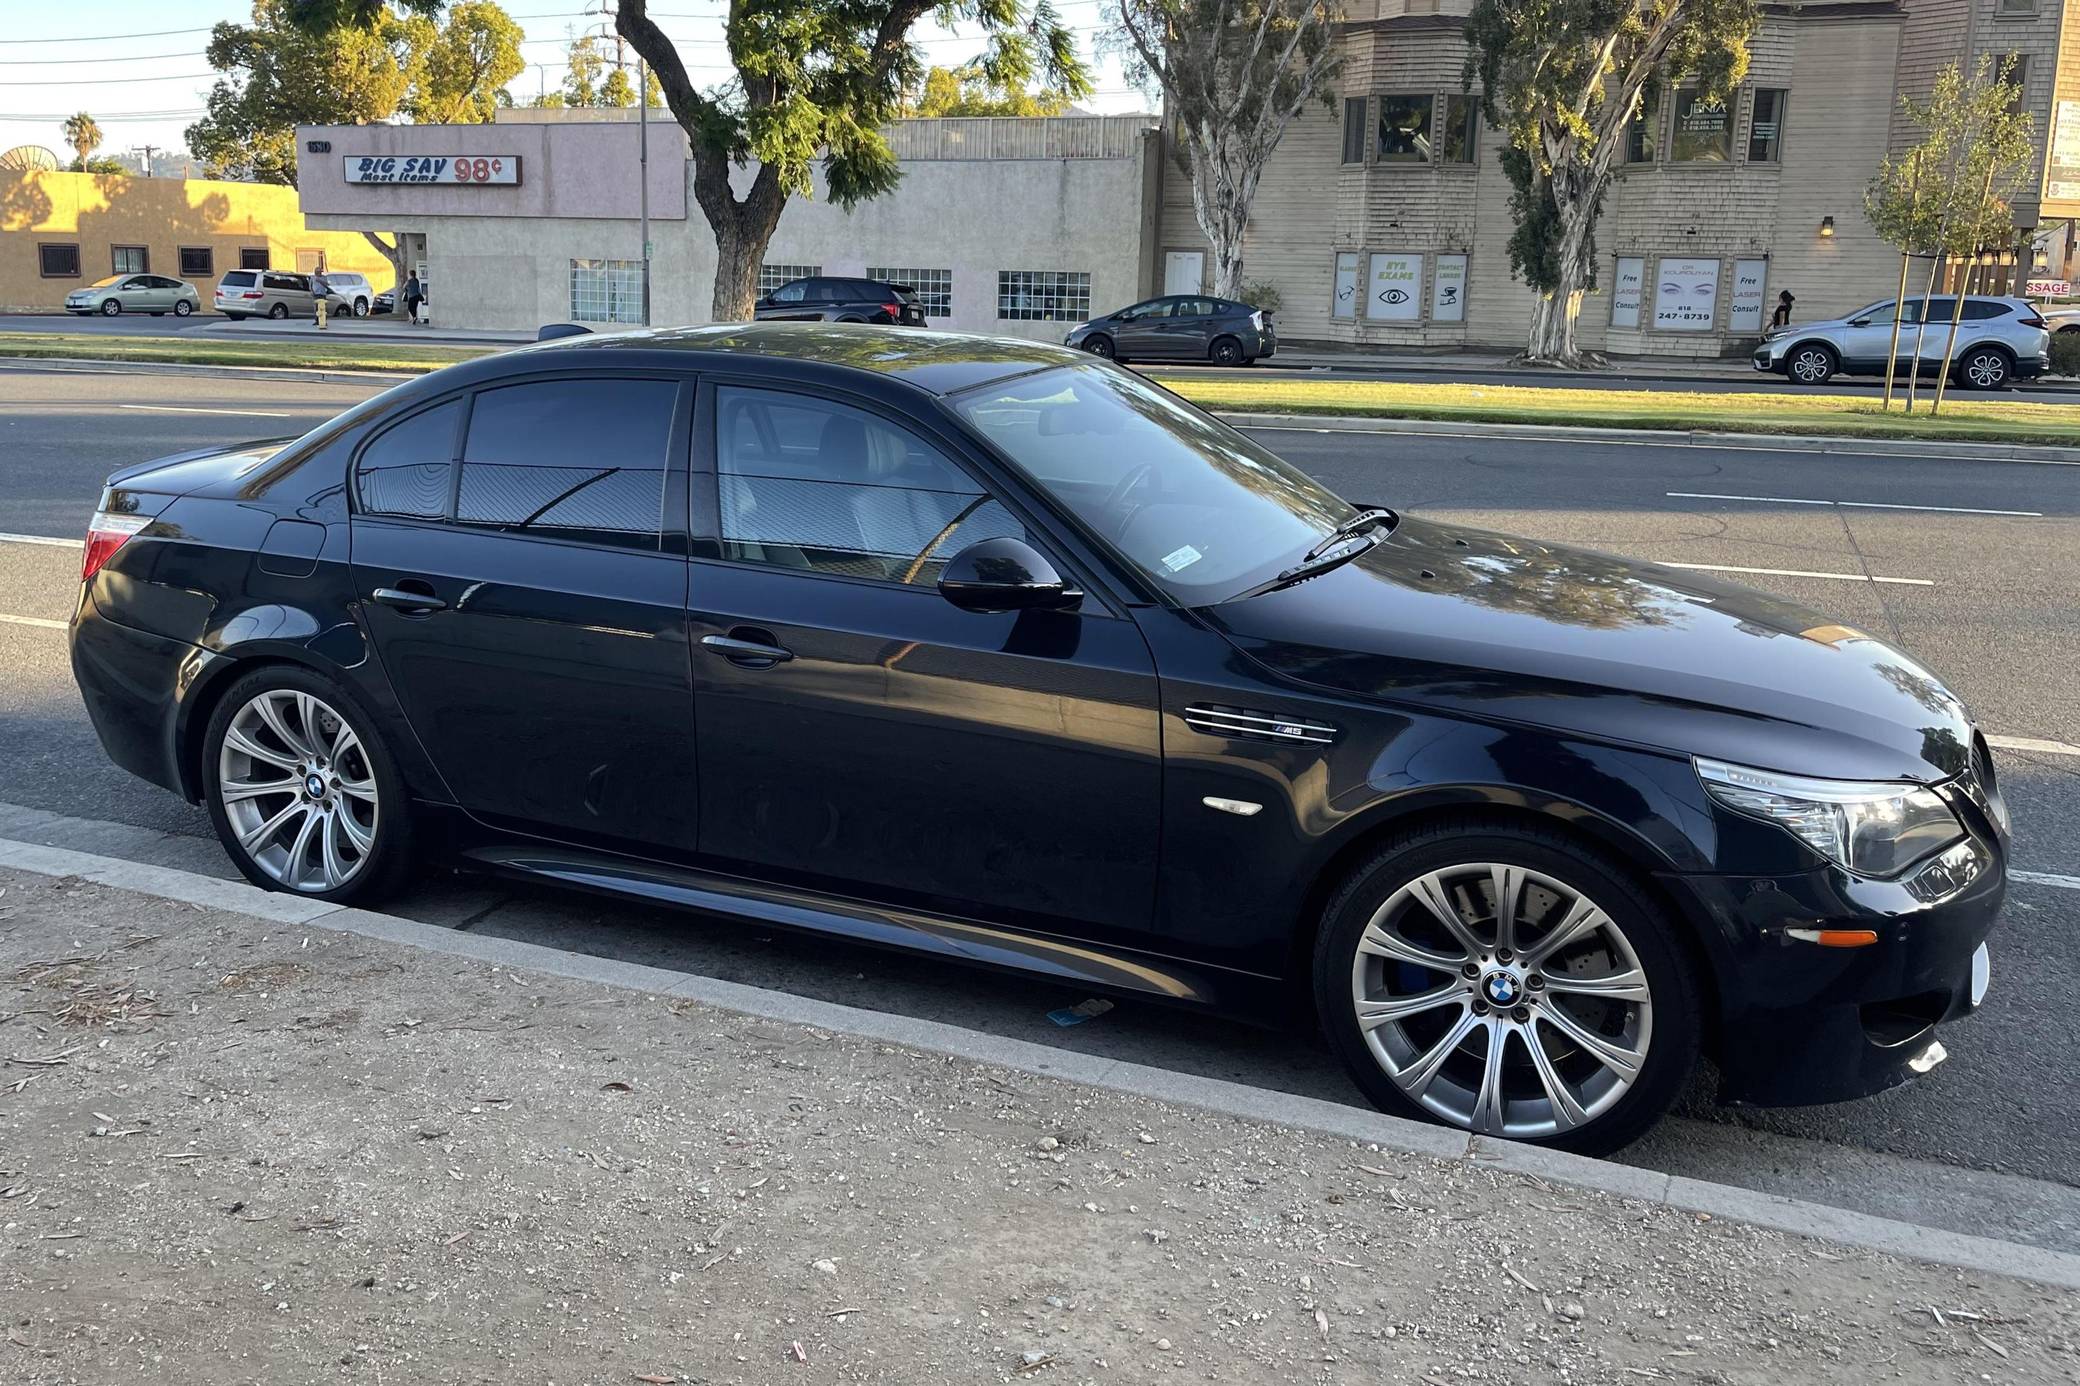 Why is the E60 M5 so cheap?